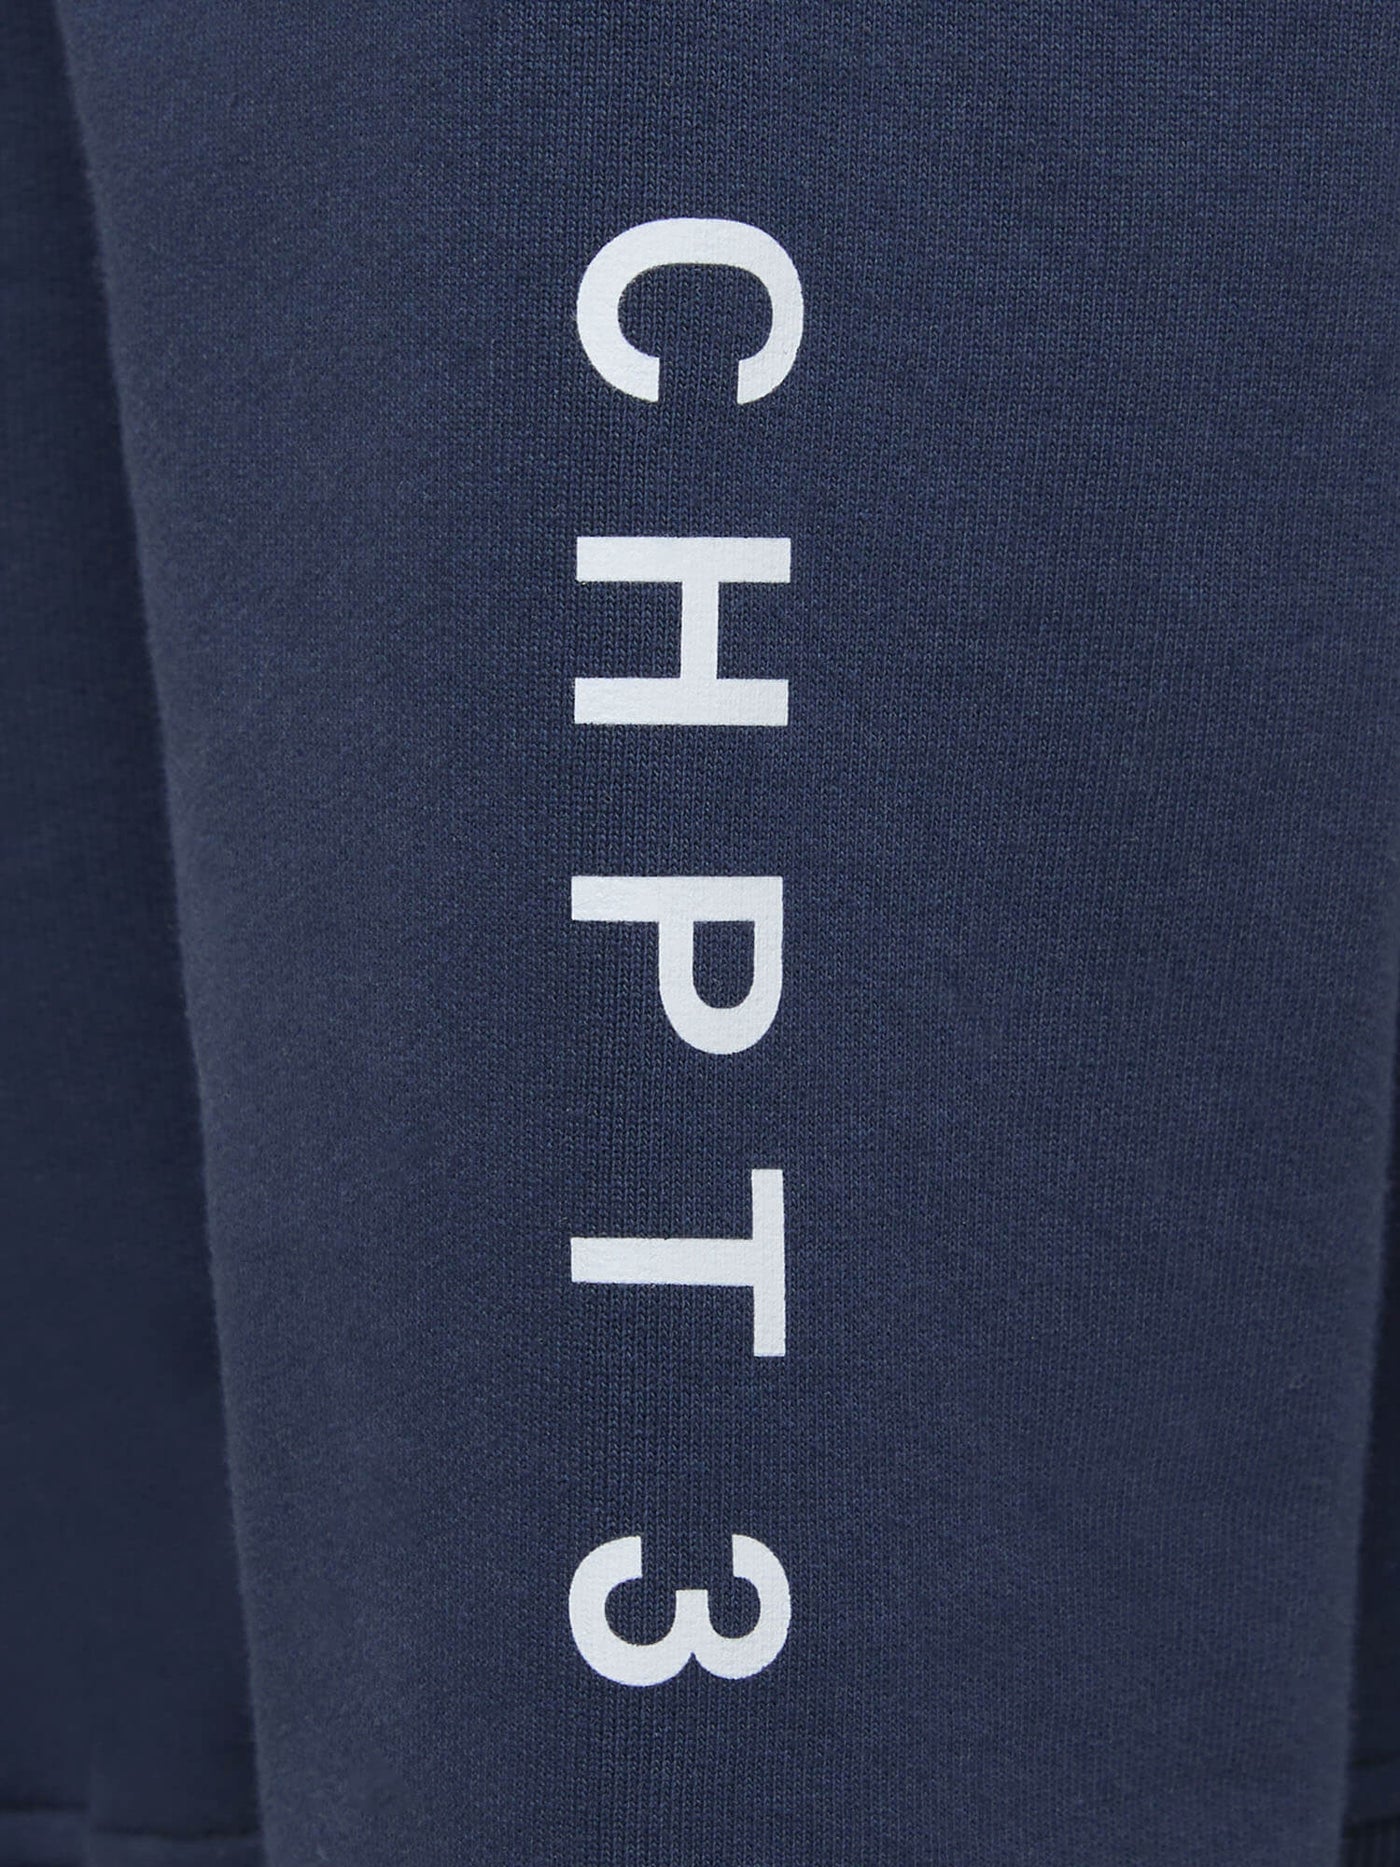 CHPT3 Elysée mens cotton sweatshirt in Outer Space navy blue, close-up of sleeve print #color_outer-space-blue